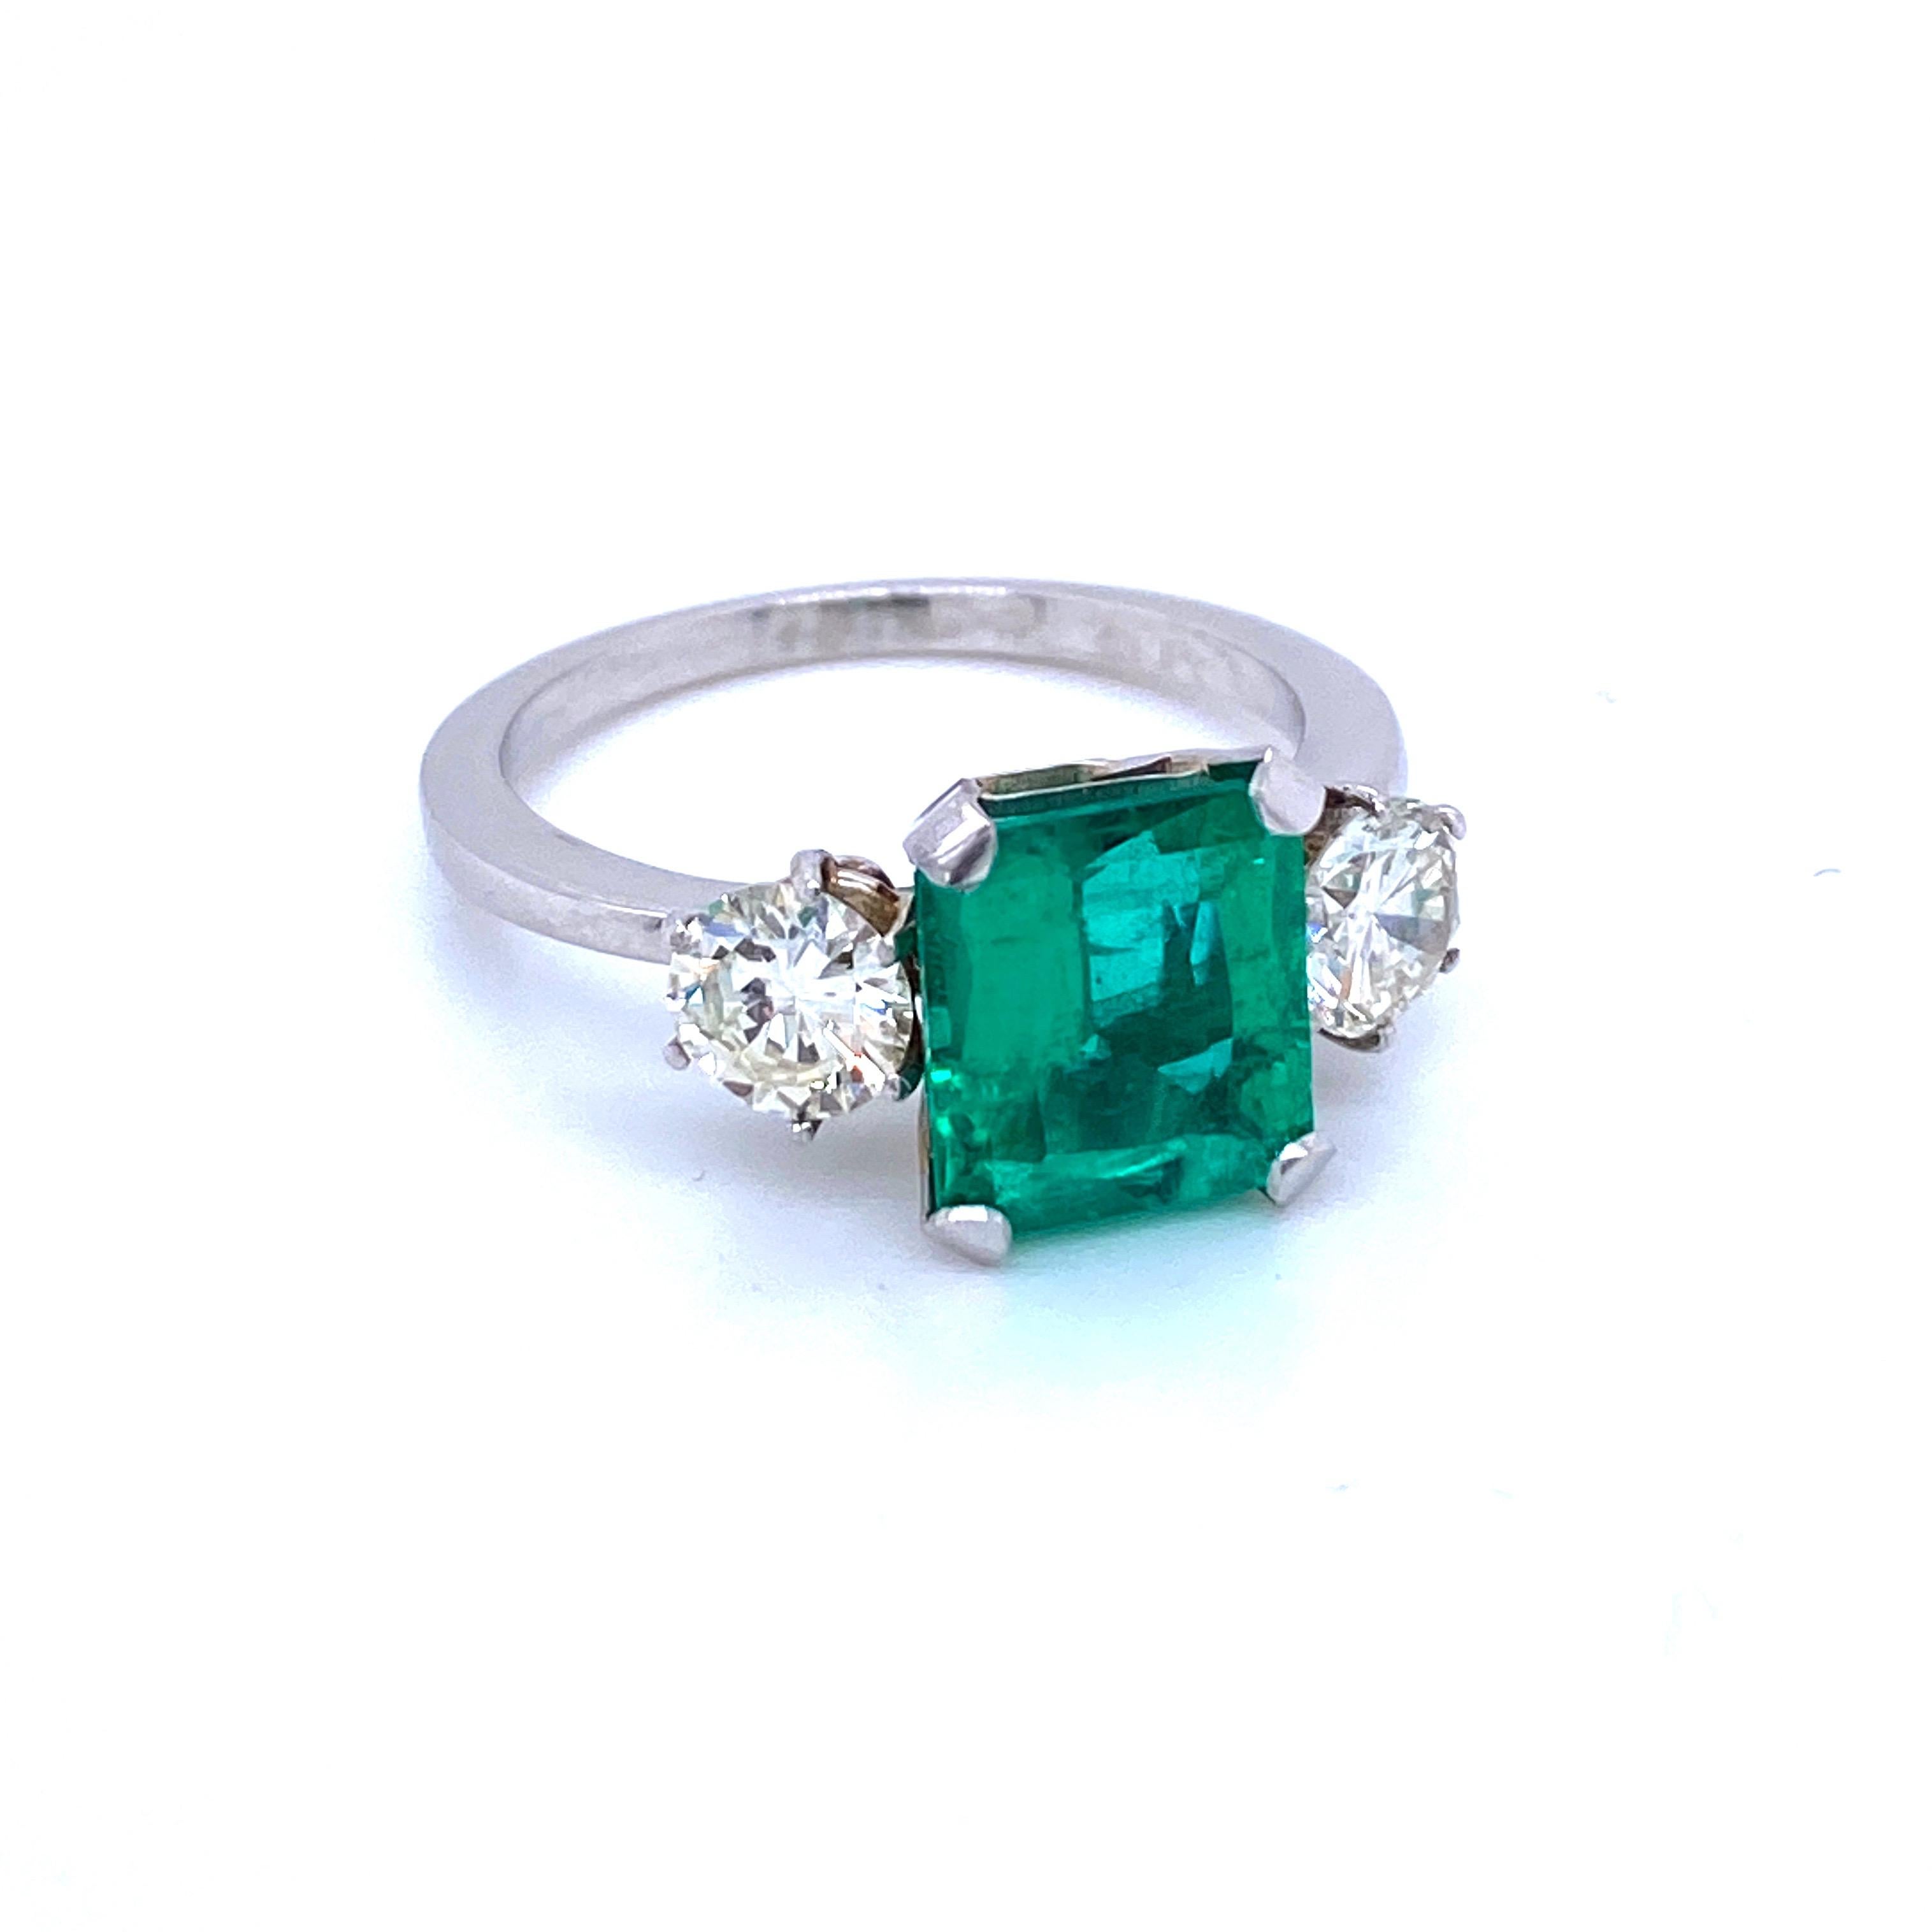 A beautiful and classy Platinum engagement ring showcasing a Natural certified Colombian Vivid green Emerald approx. 2.75 carats of great quality, surrounded by approx. 1.10 carat of Old mine cut diamonds graded I color Vvs.
Origin Italy, circa